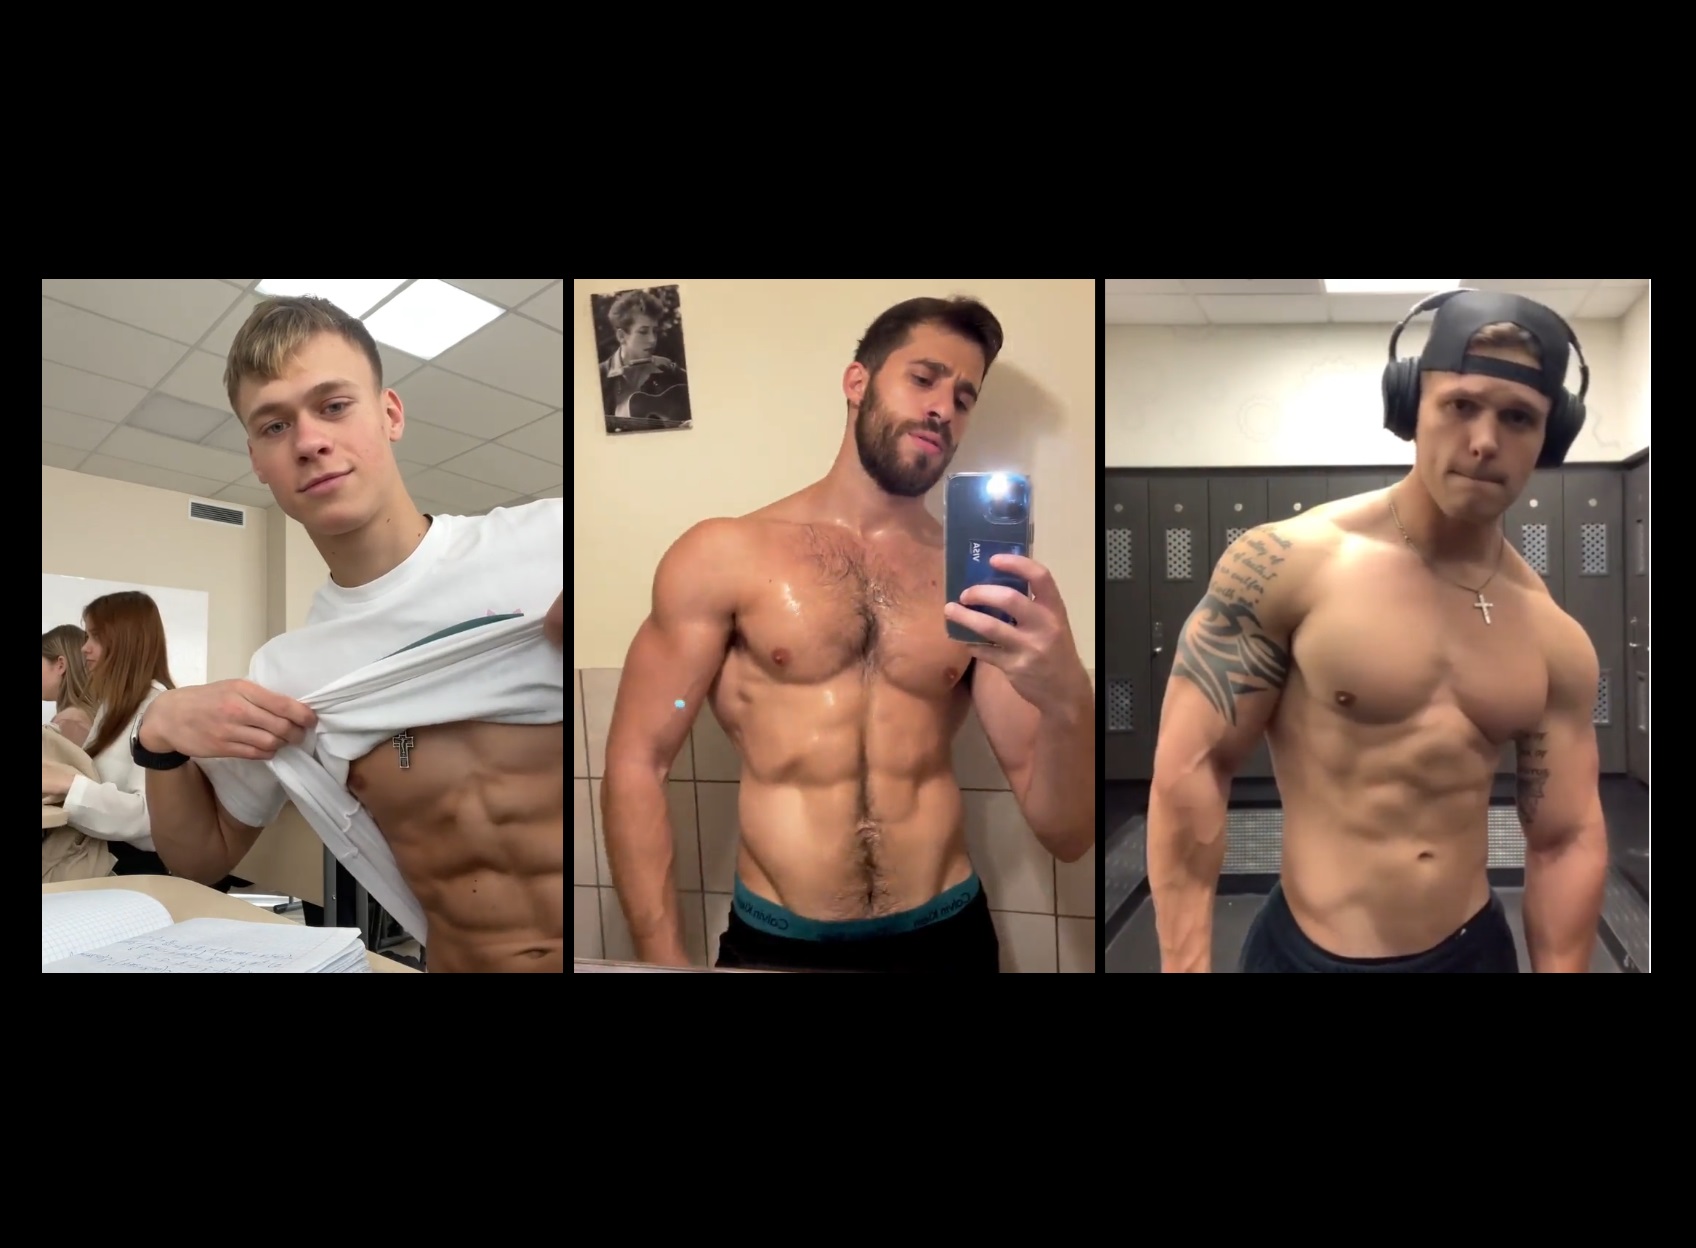 What kind of muscular guy do you prefer? (no dick/sex)